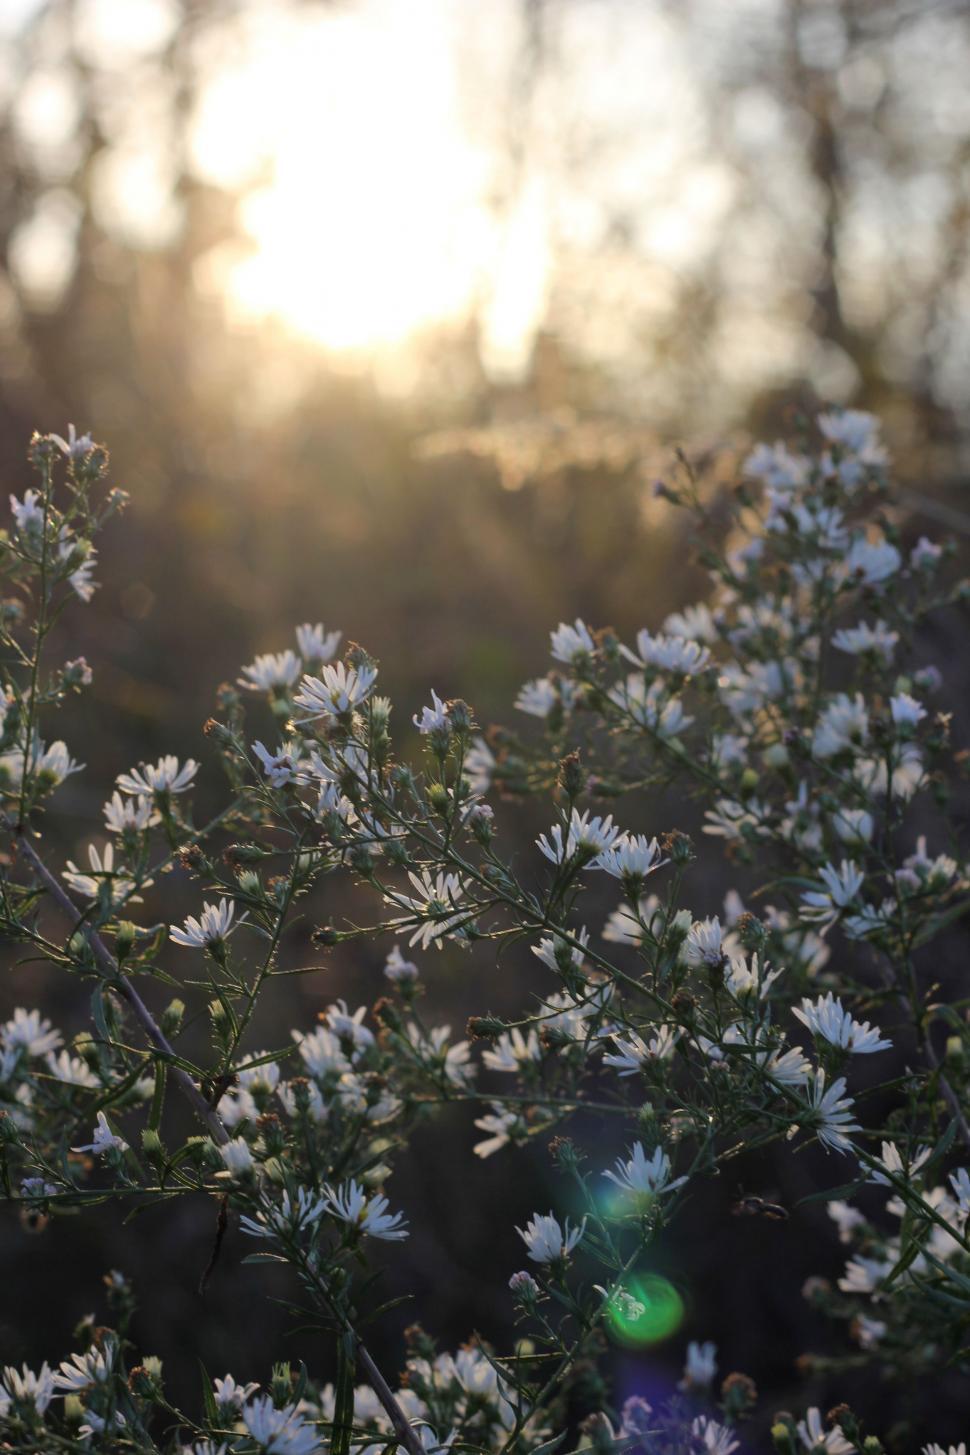 Free Image of Cluster of White Flowers in a Field 